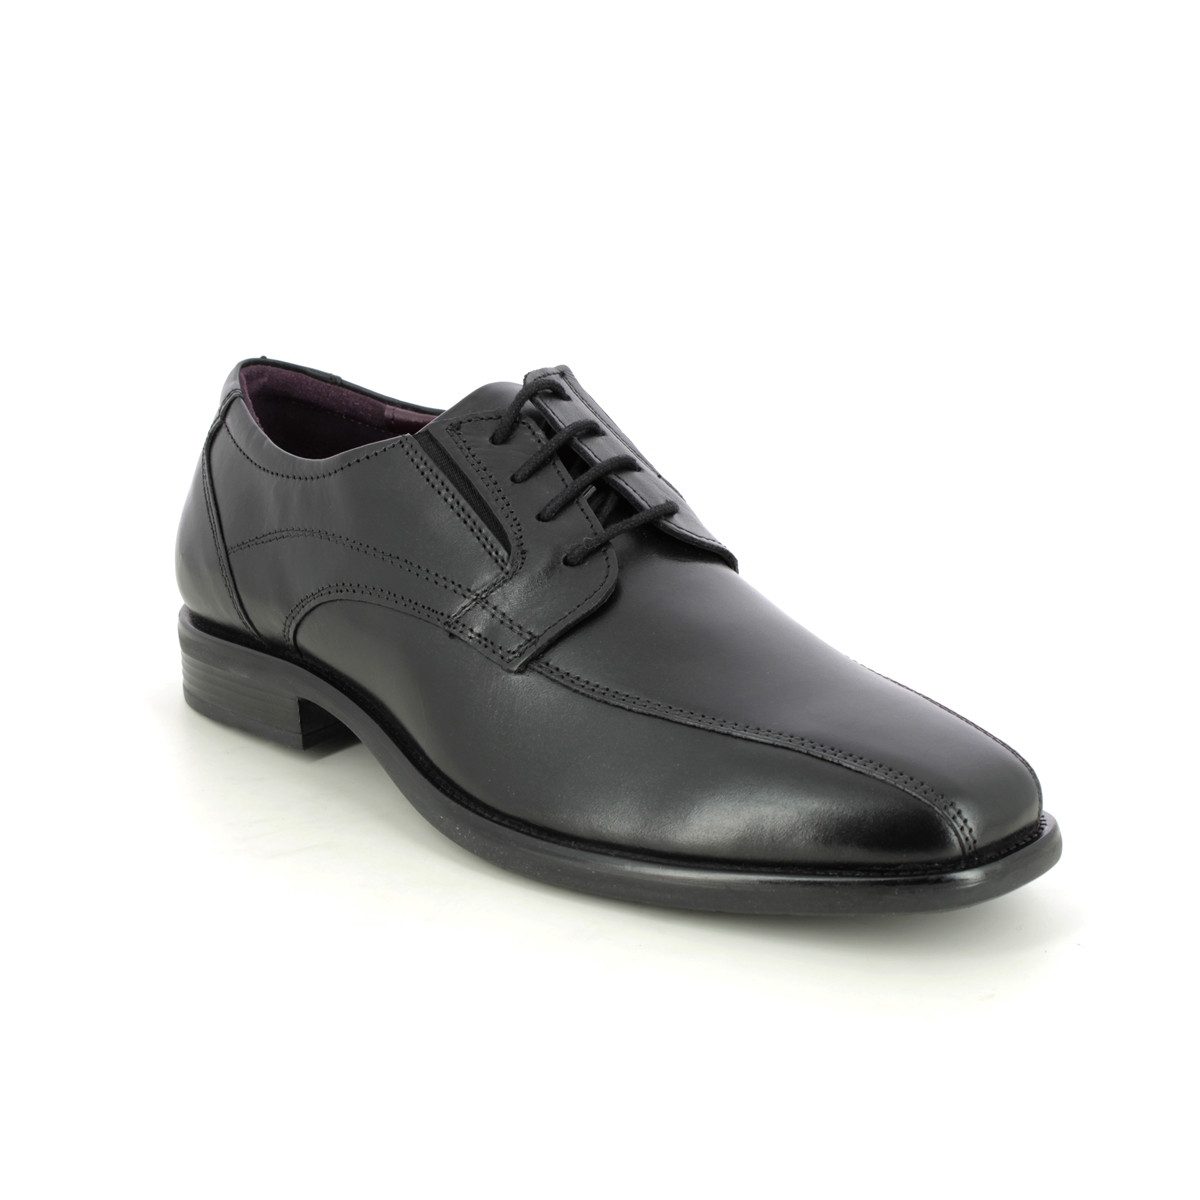 Lotus Maddock Wide Black leather Mens formal shoes in a Plain Leather in Size 6